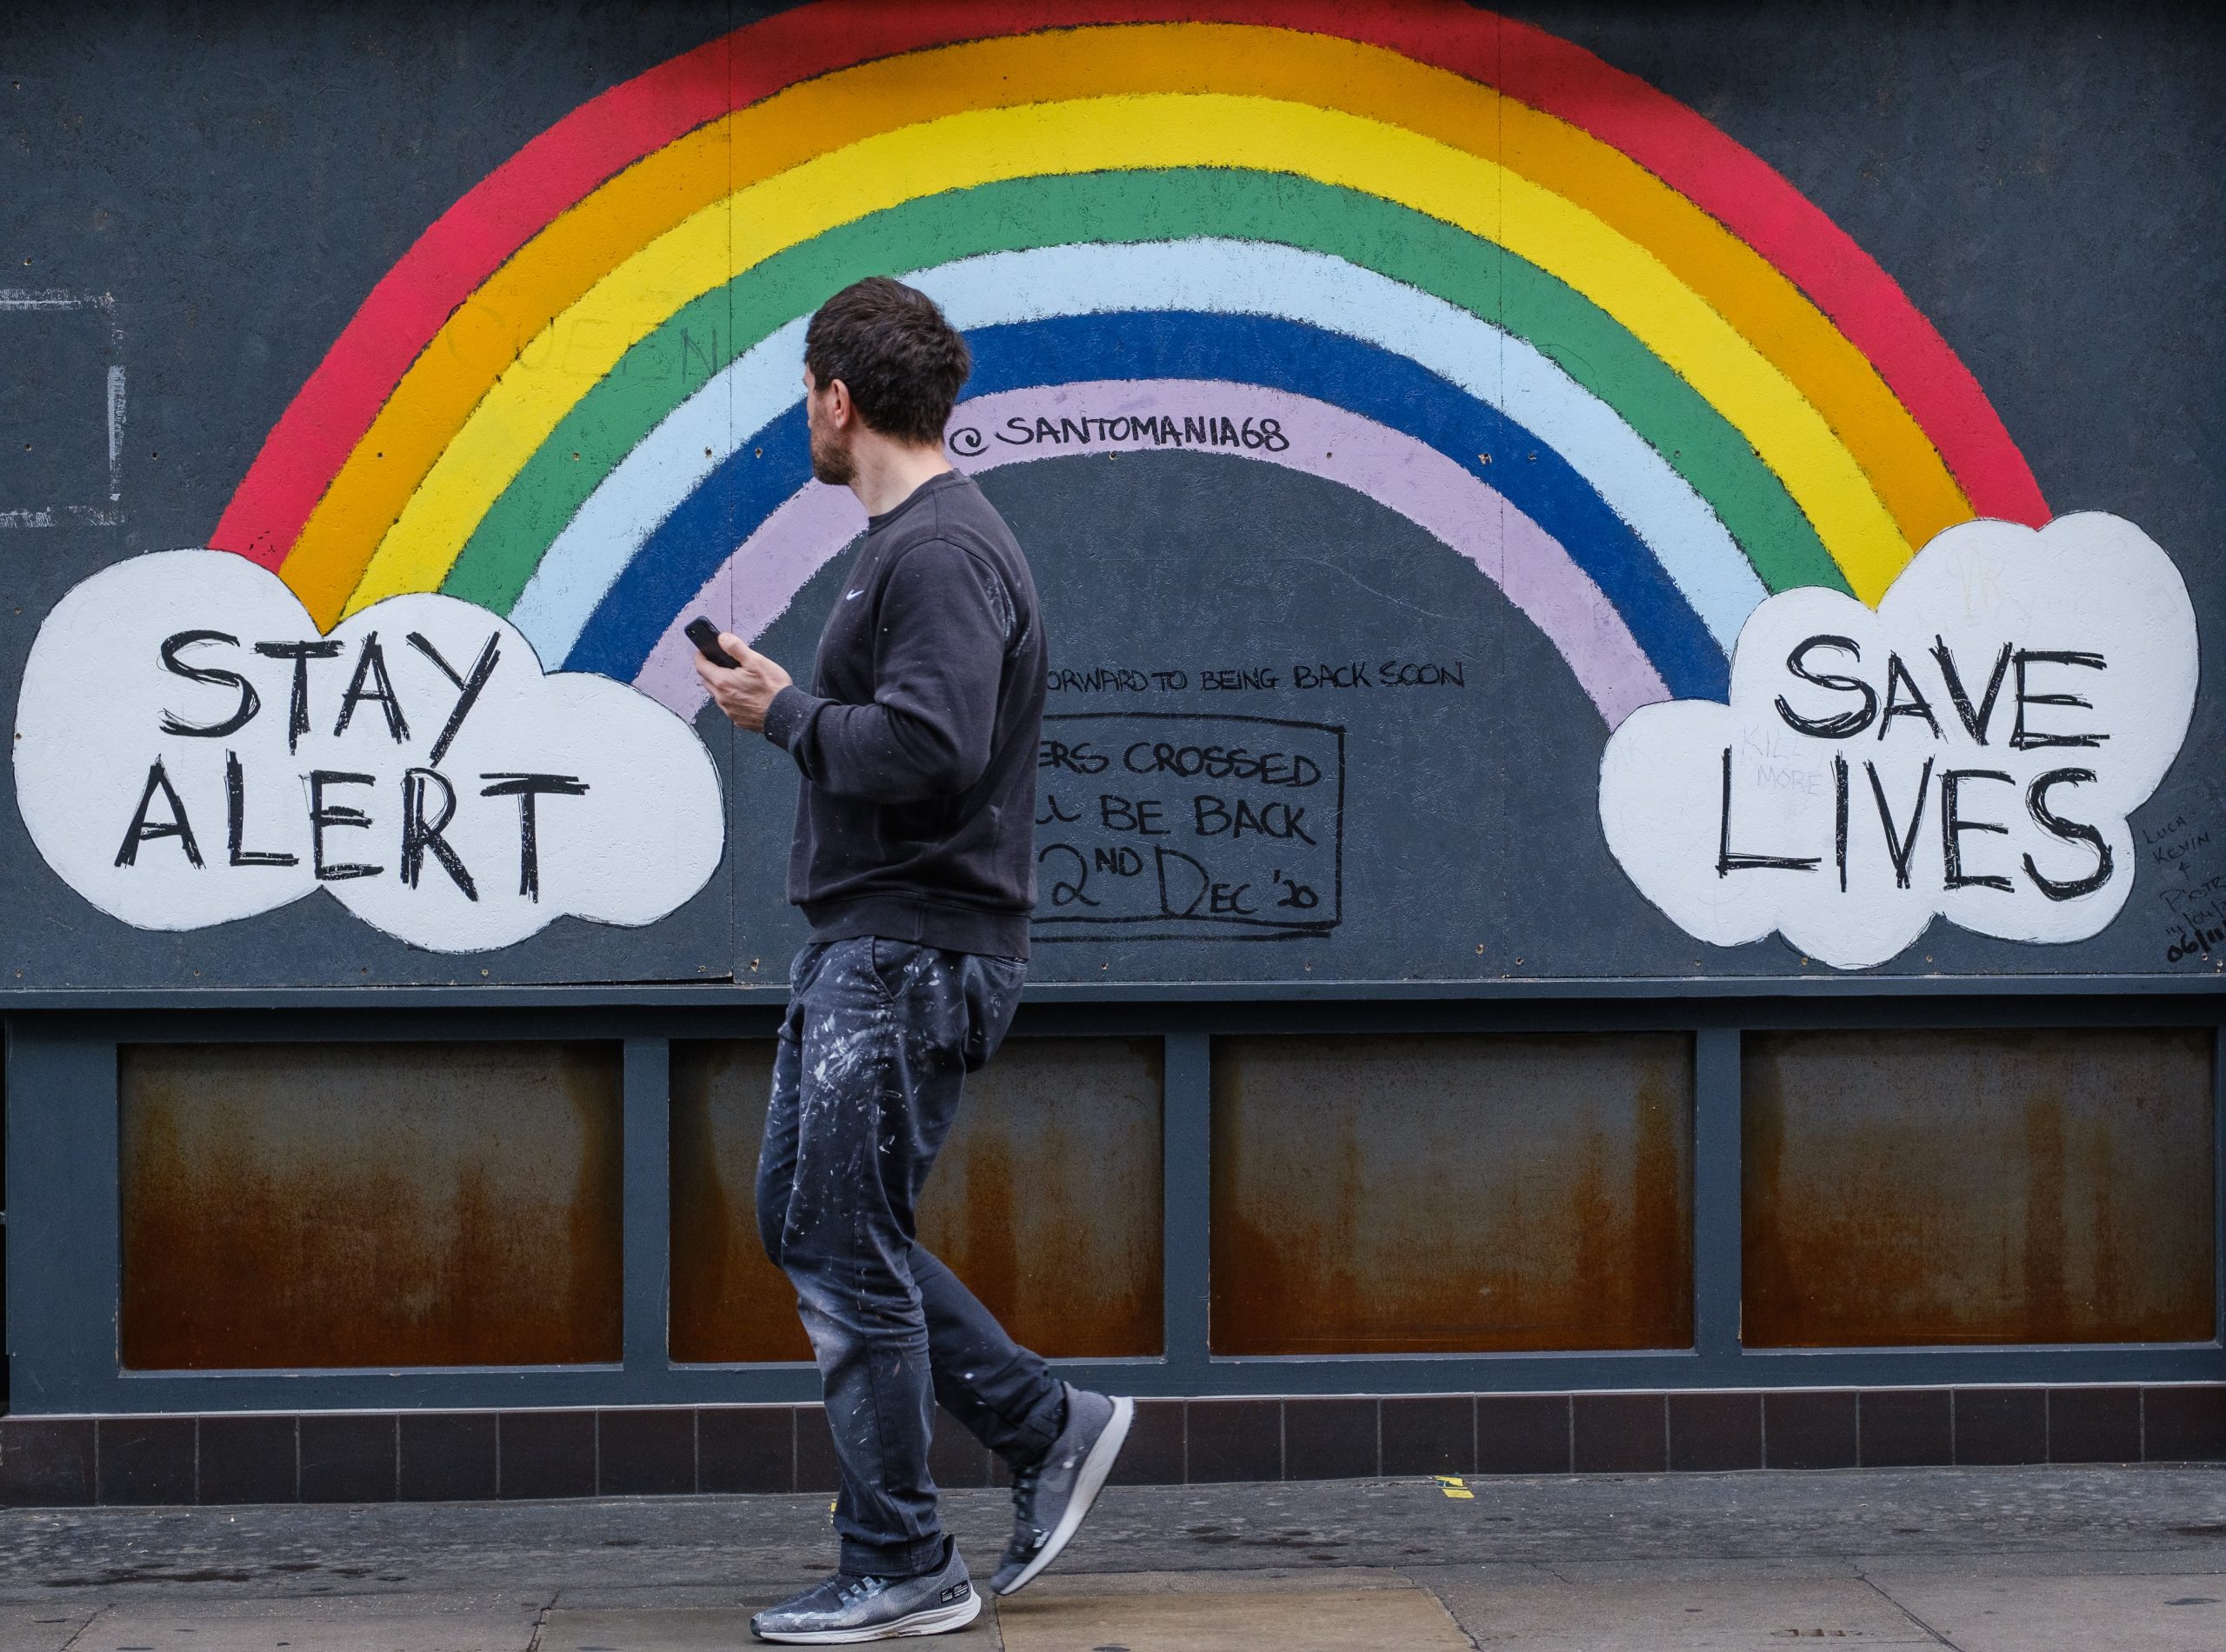 Stay Alert Stay Safe, Rainbow painted on wall with Stay Alert/ Save Lives written in clouds at each end of the rainbow